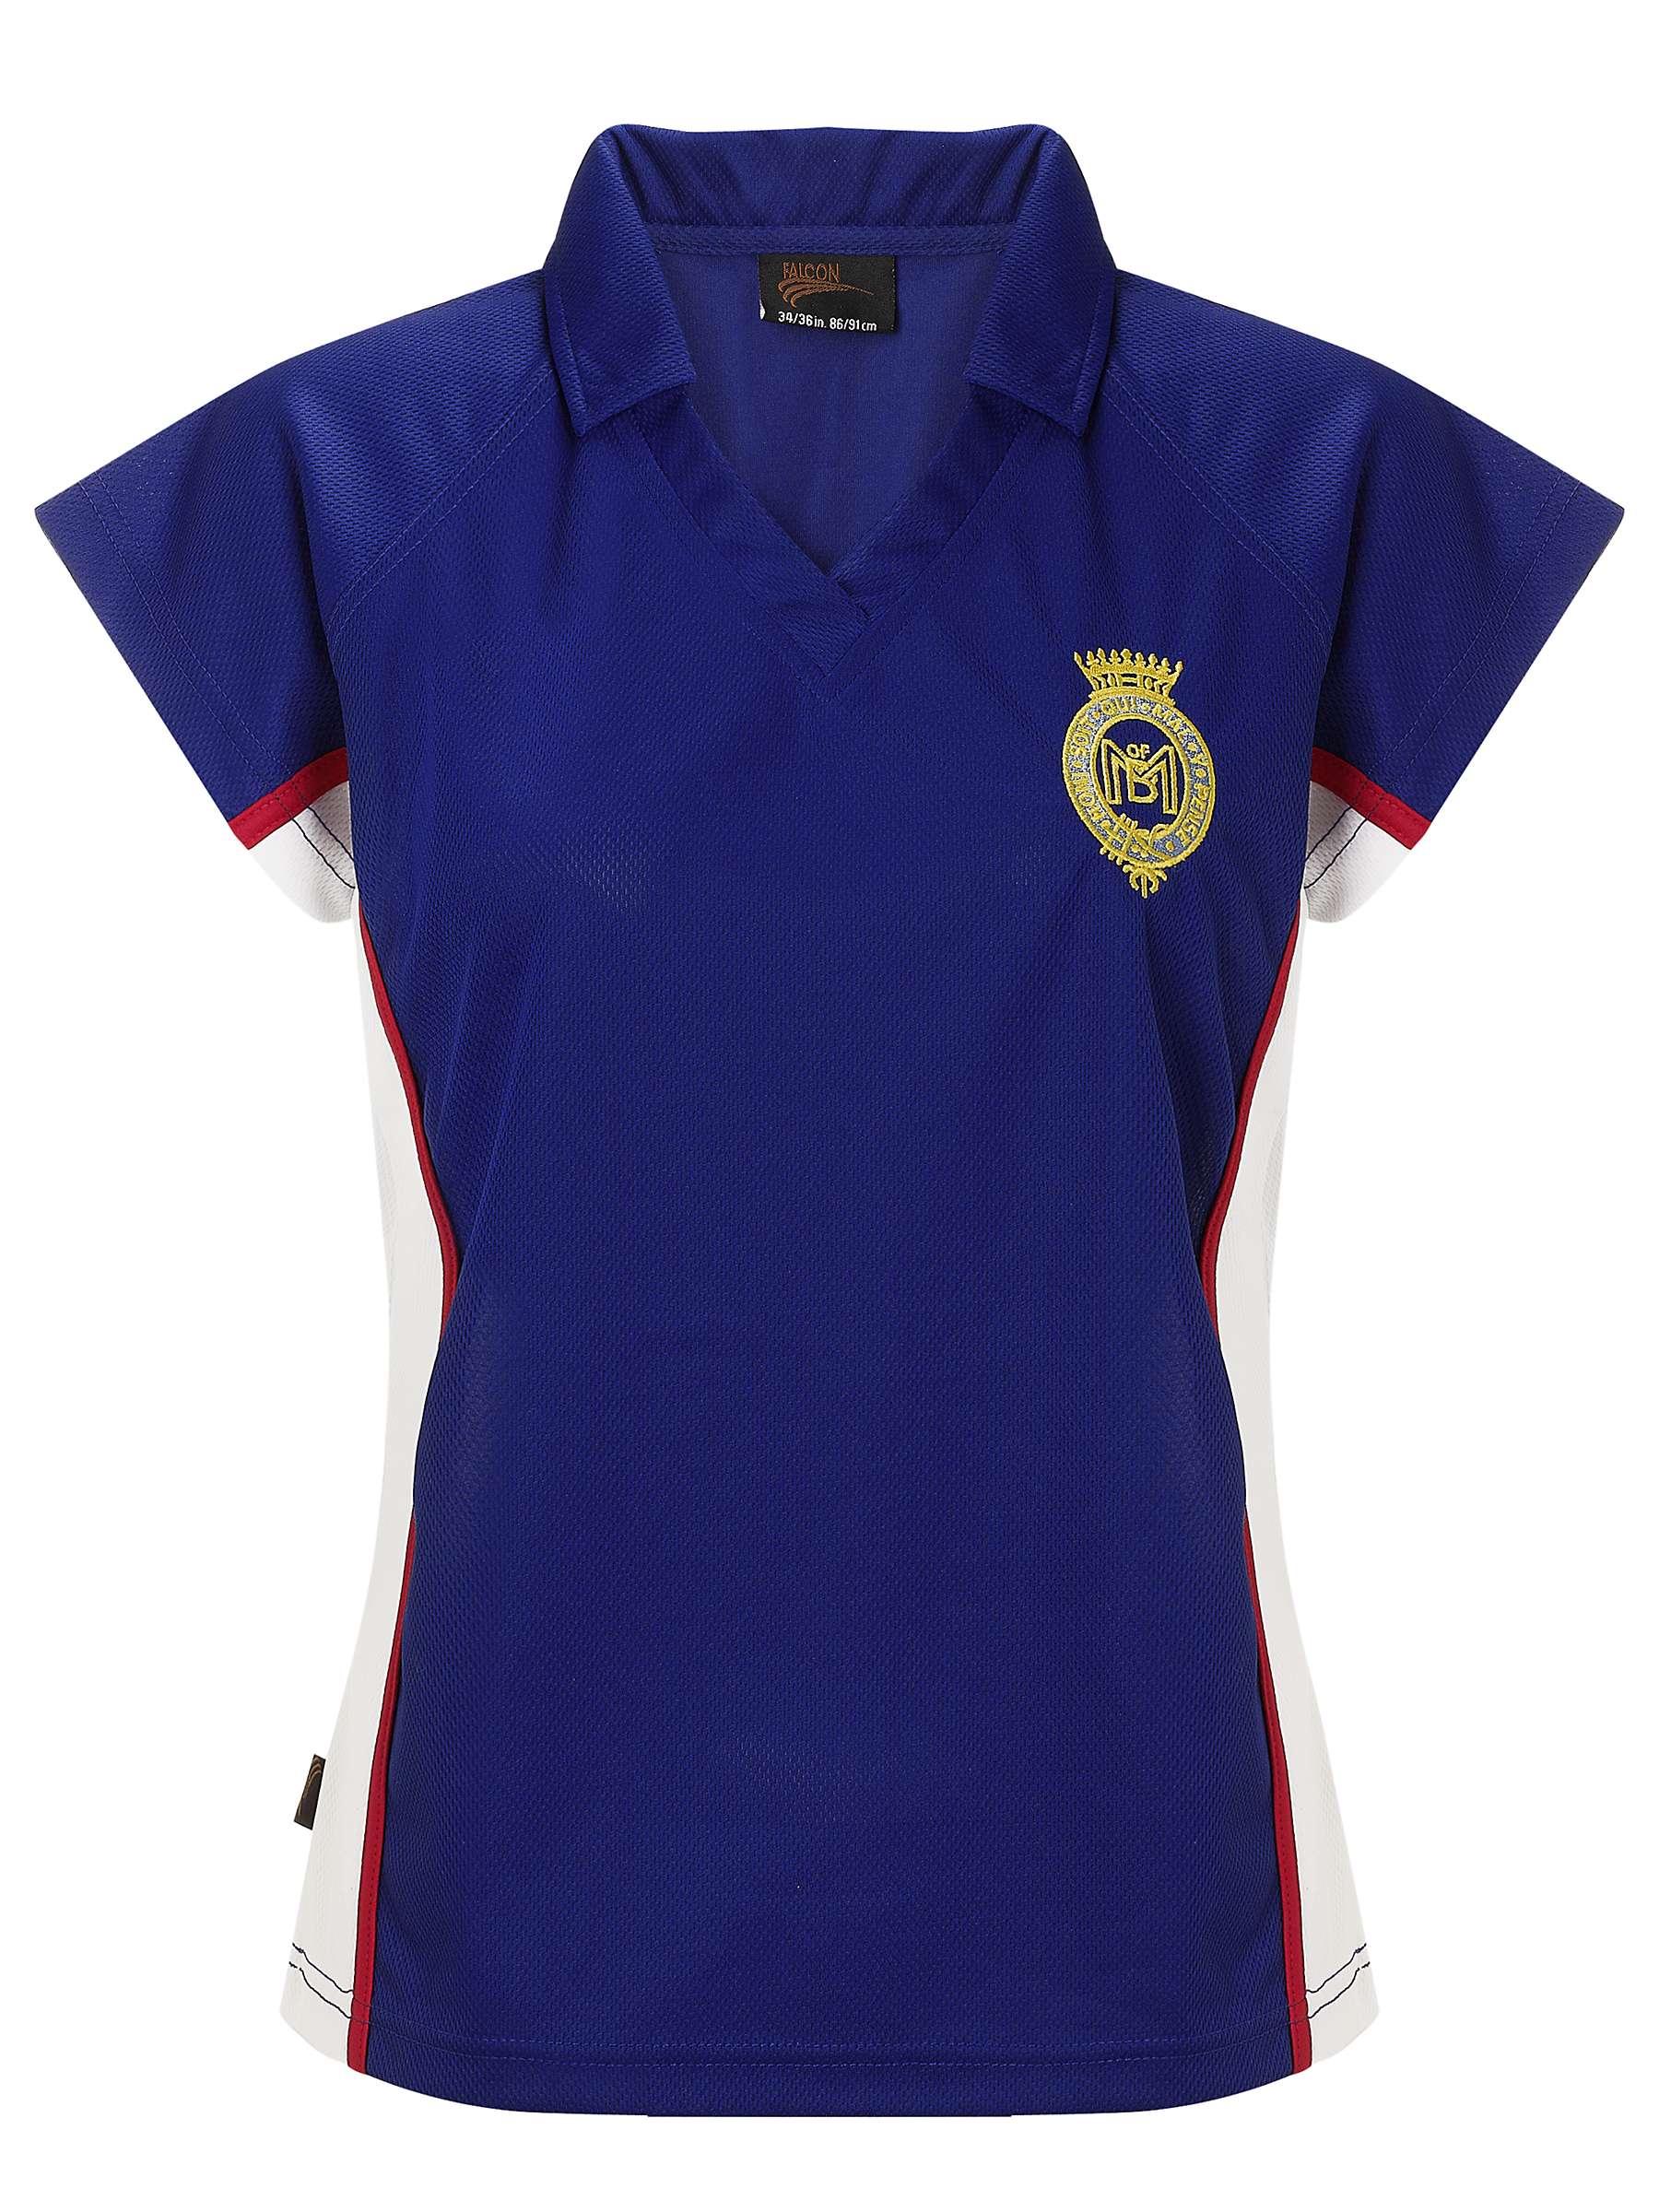 Buy The Mountbatten School Girls' Fitted Sports Polo Shirt Online at johnlewis.com